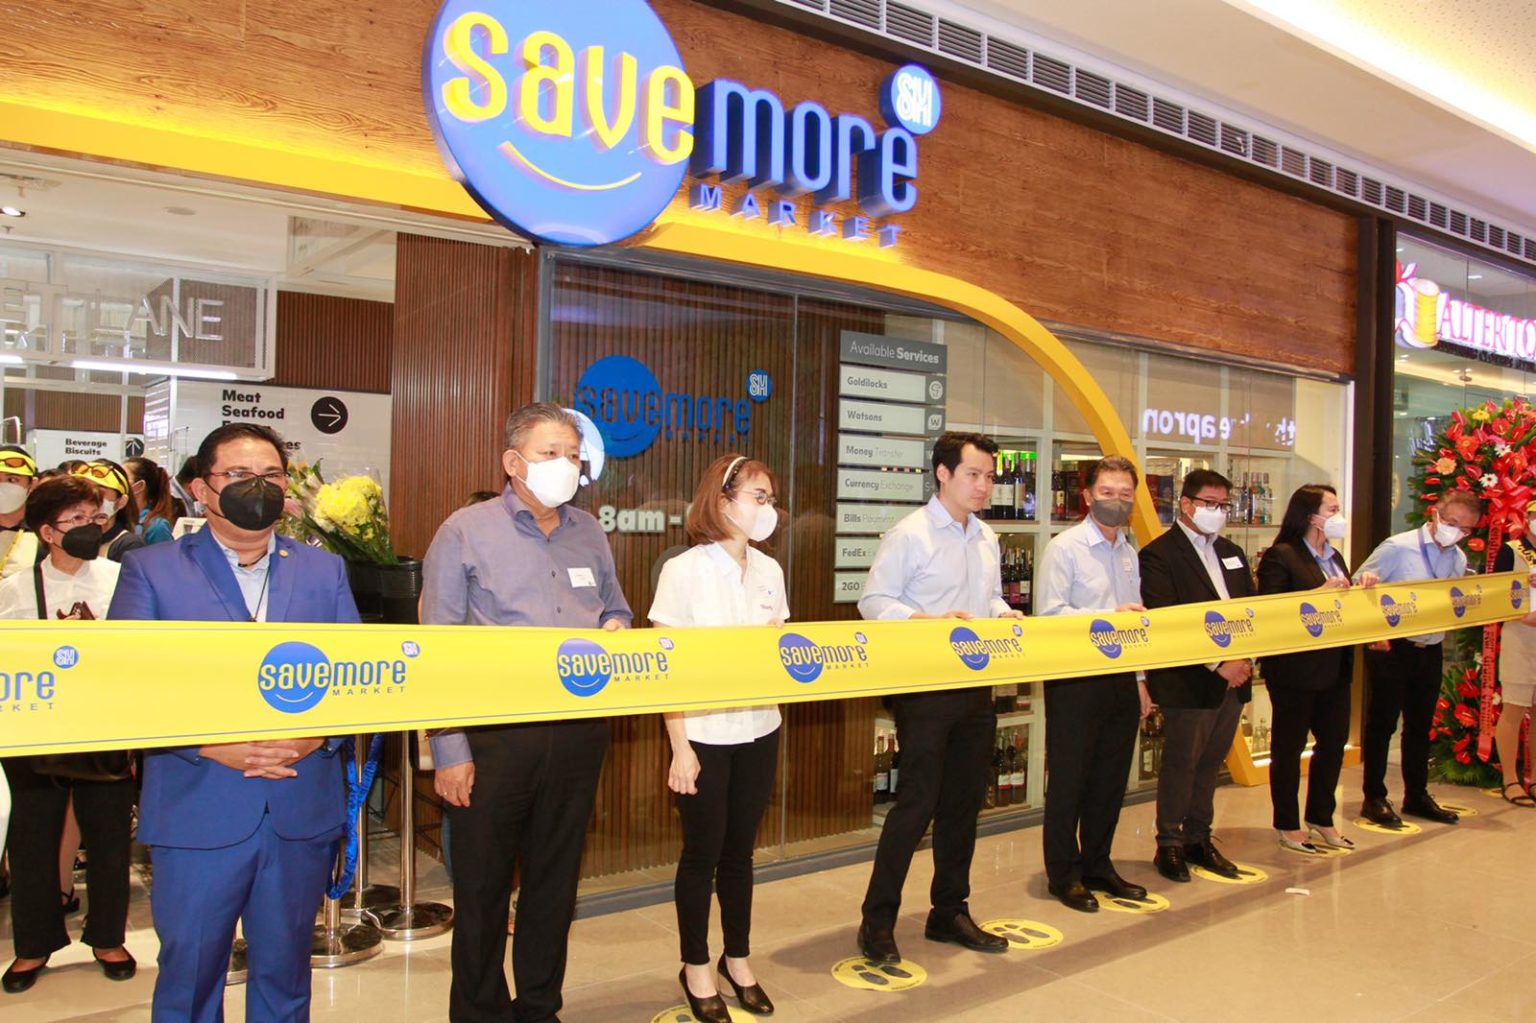 People standing behind a yellow line in front of Save More